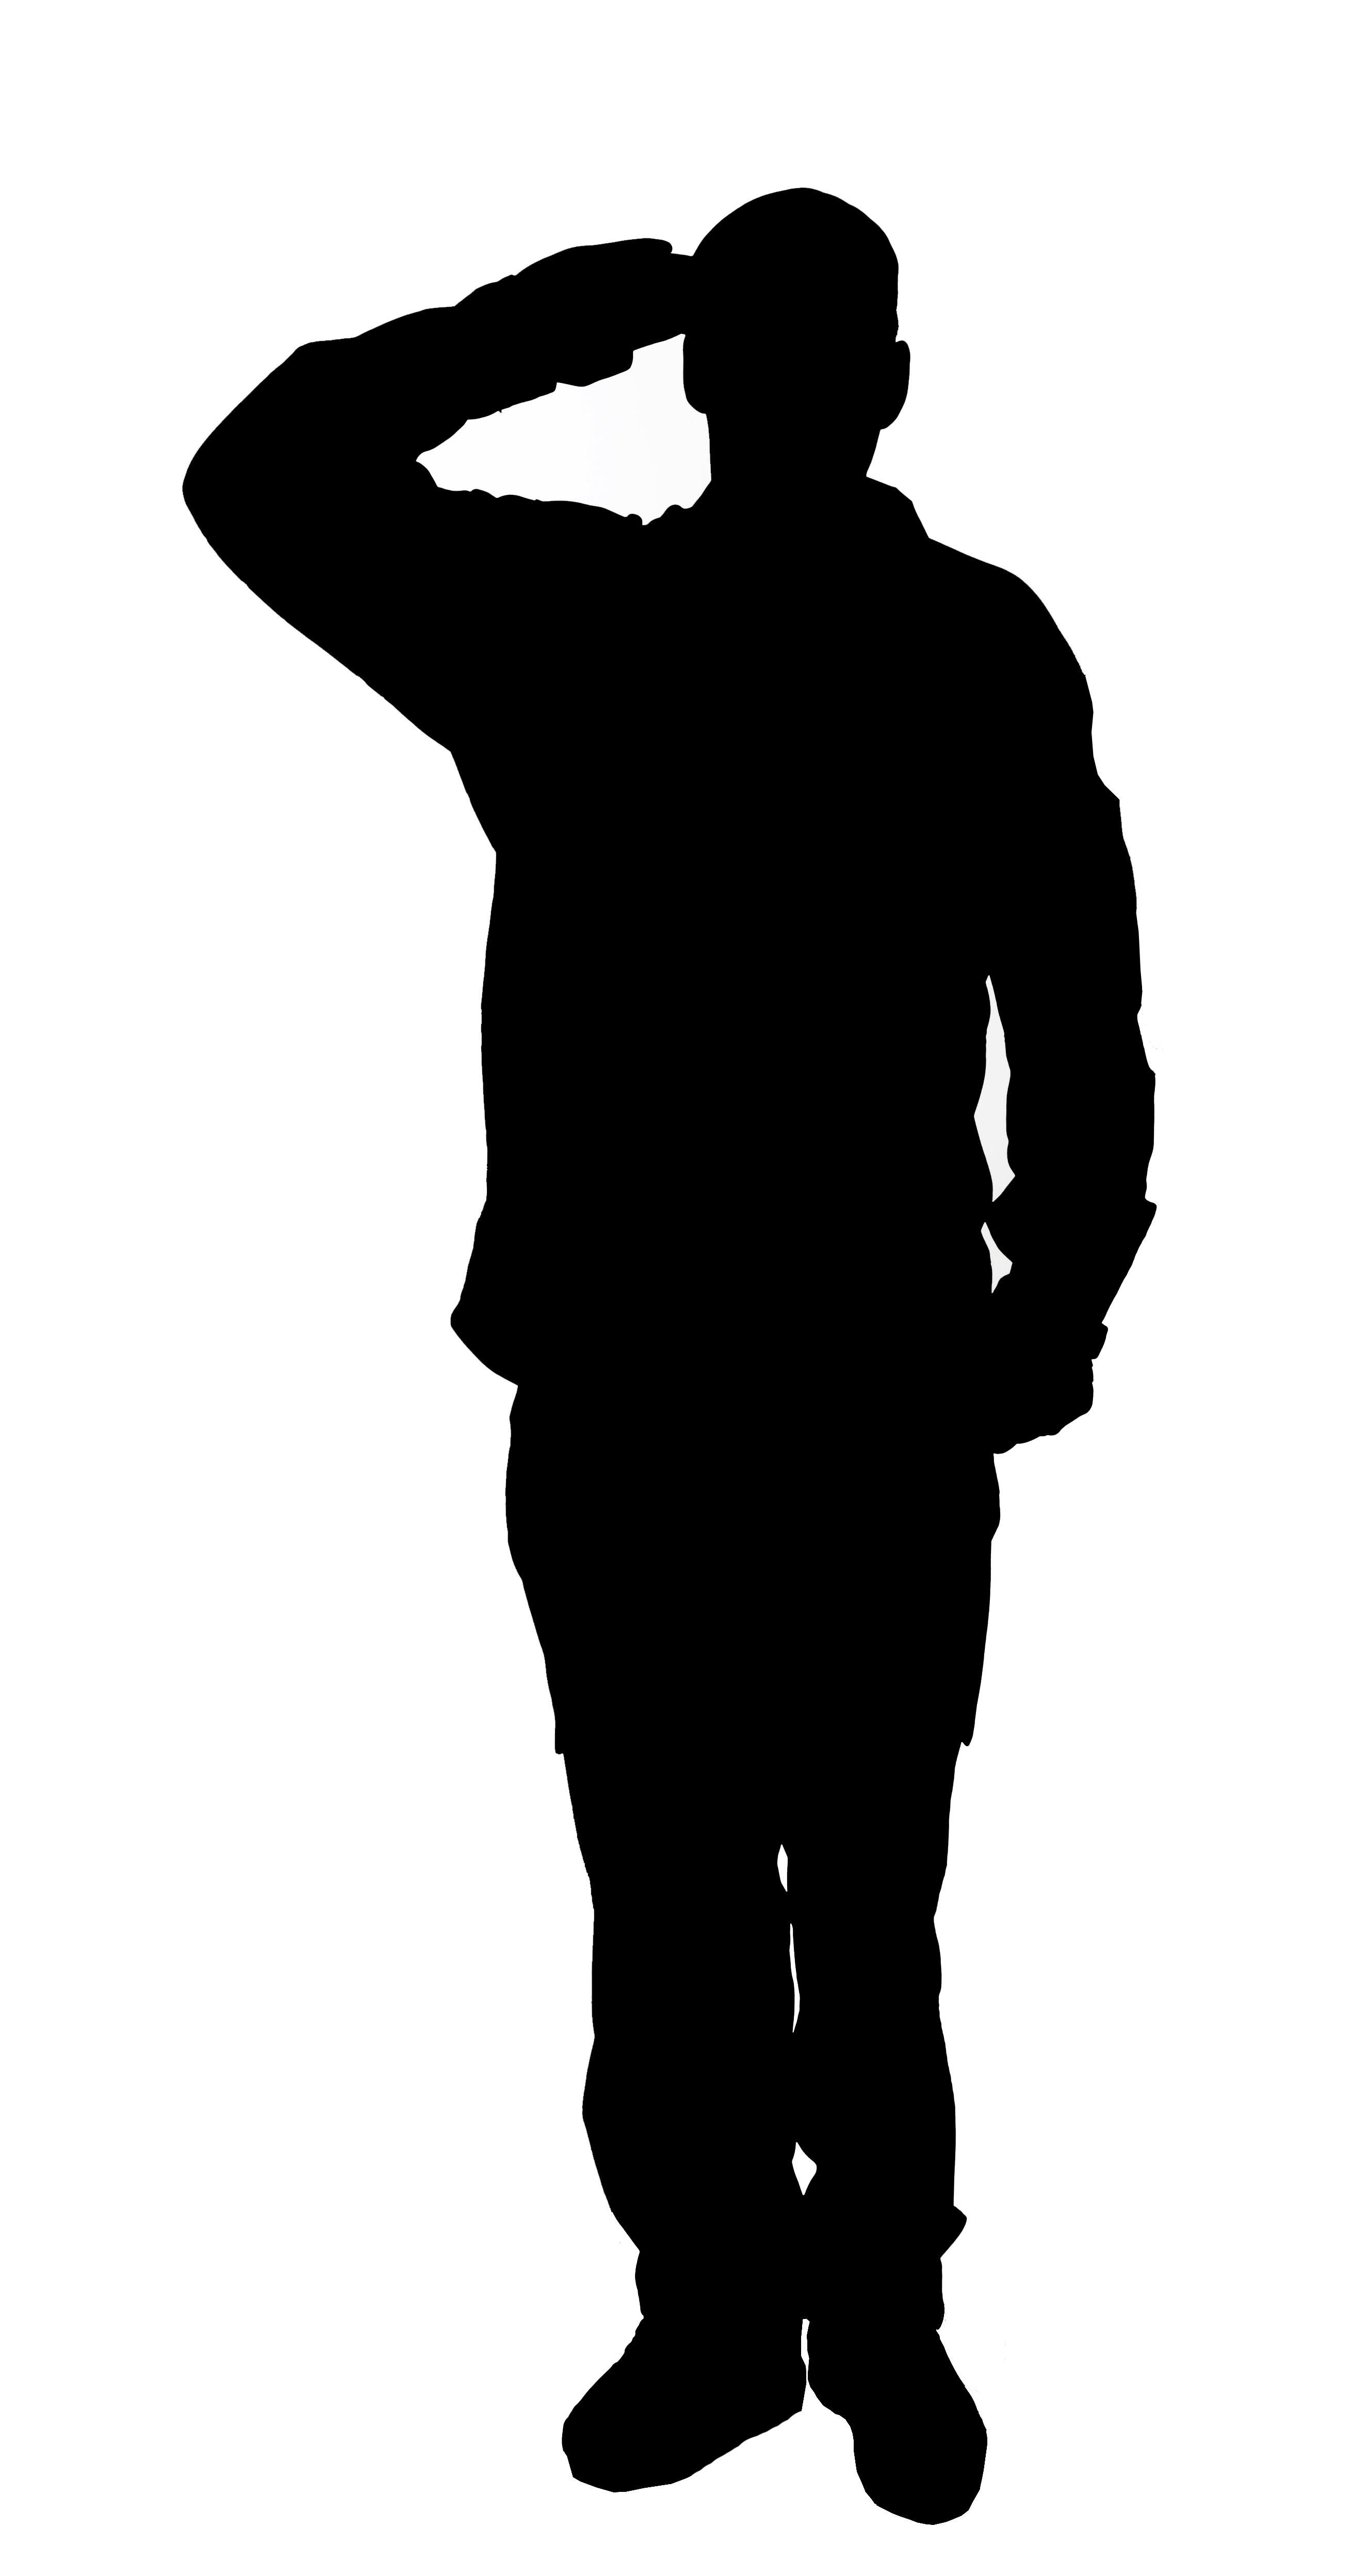 Army Soldier Salute Silhouette - Army Military